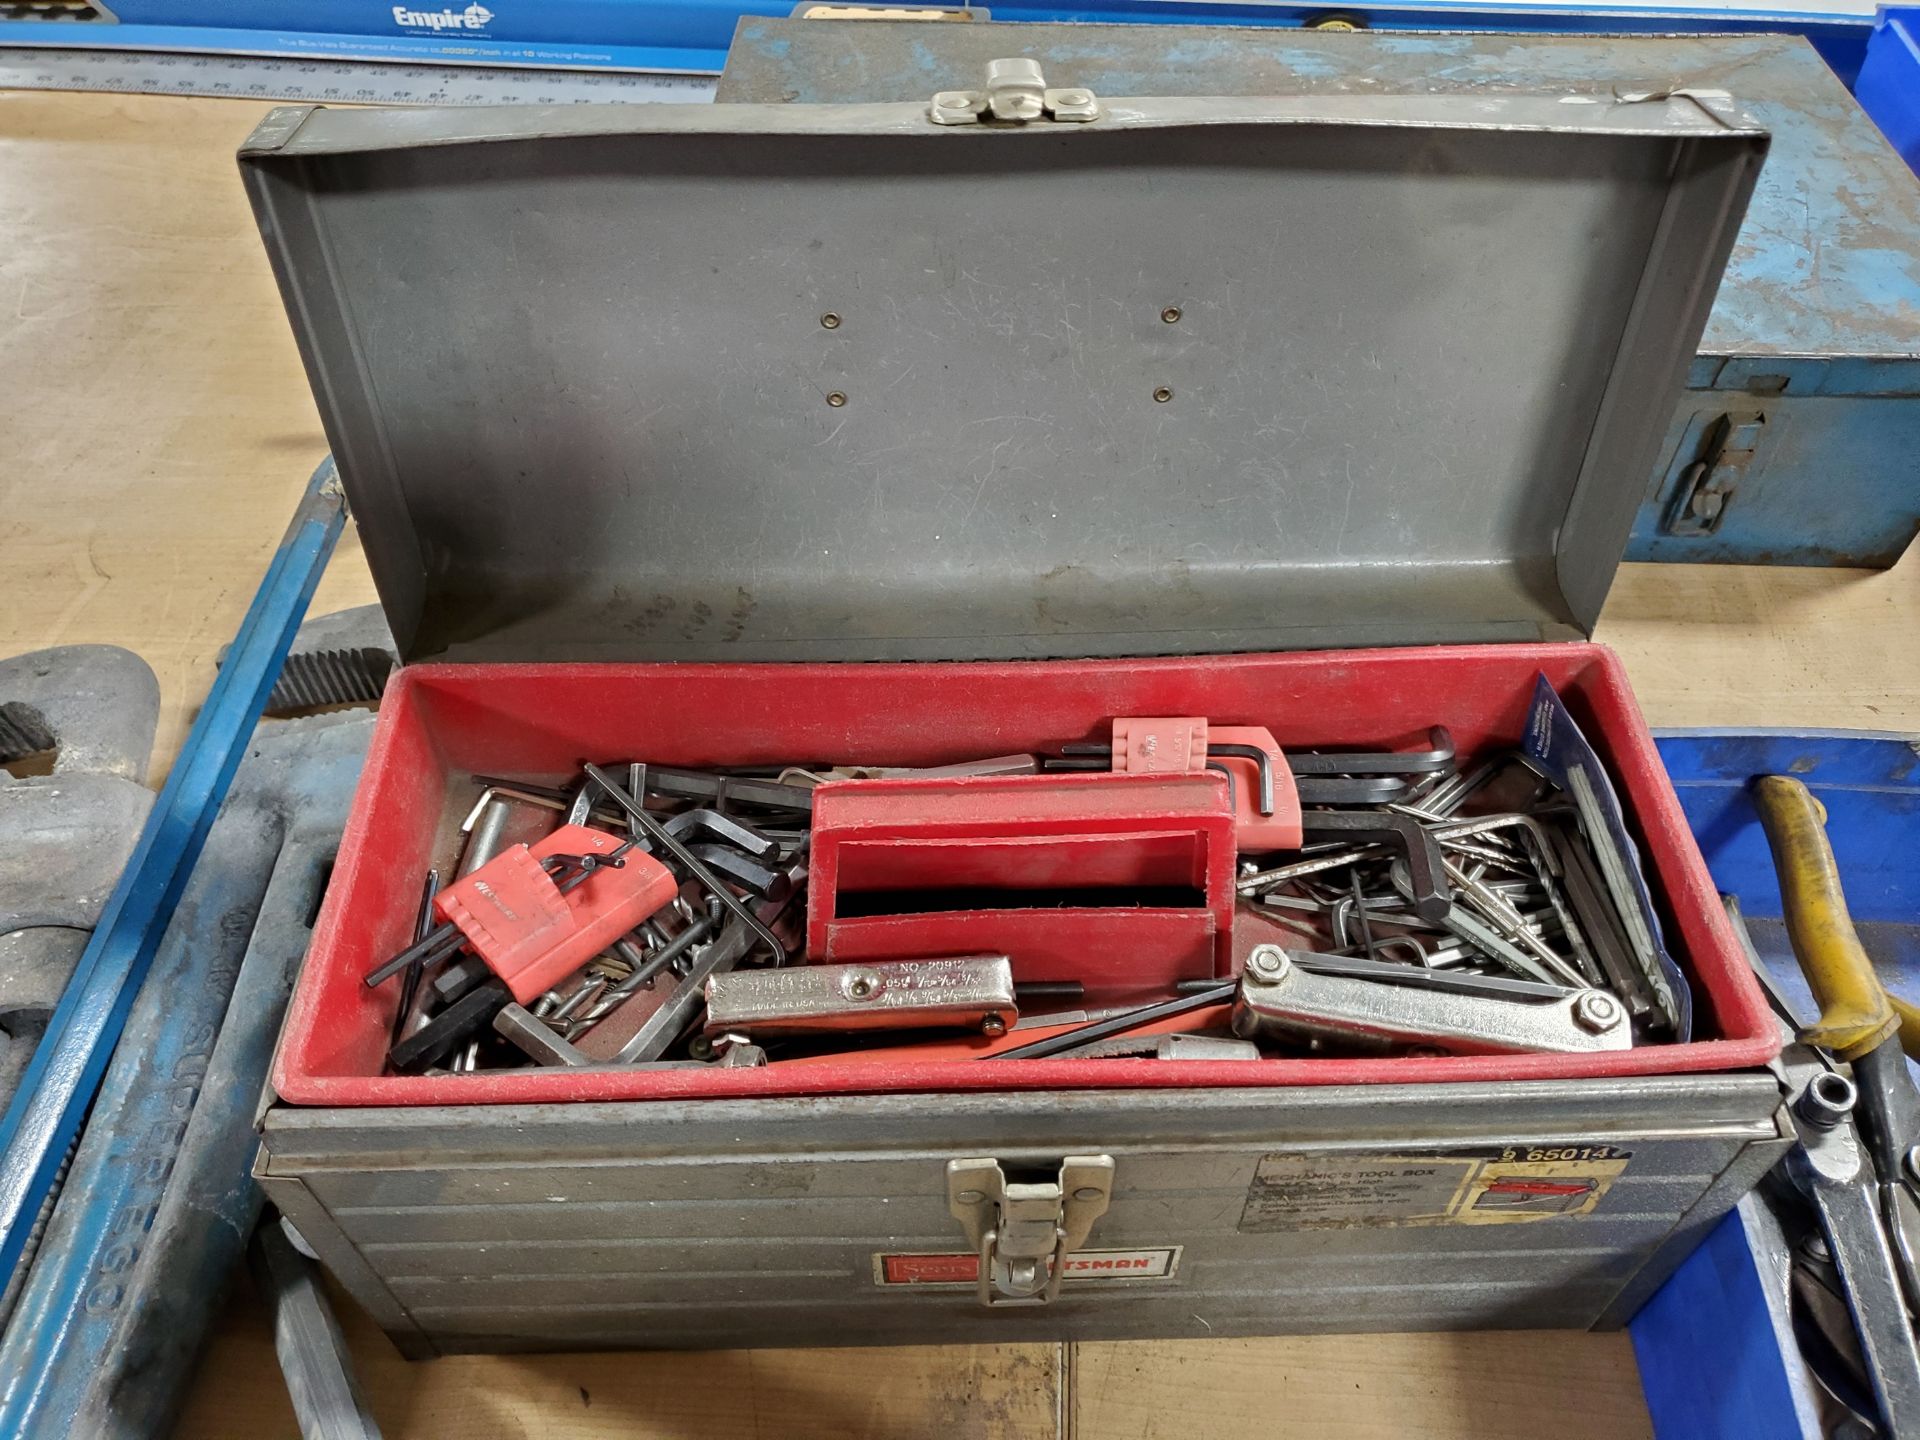 TOOLBOX WITH CRESCENT WRENCHES, OPEN/CLOSED END WRENCHES, ALLEN WRENCHES AND ASSORTED TOOLS